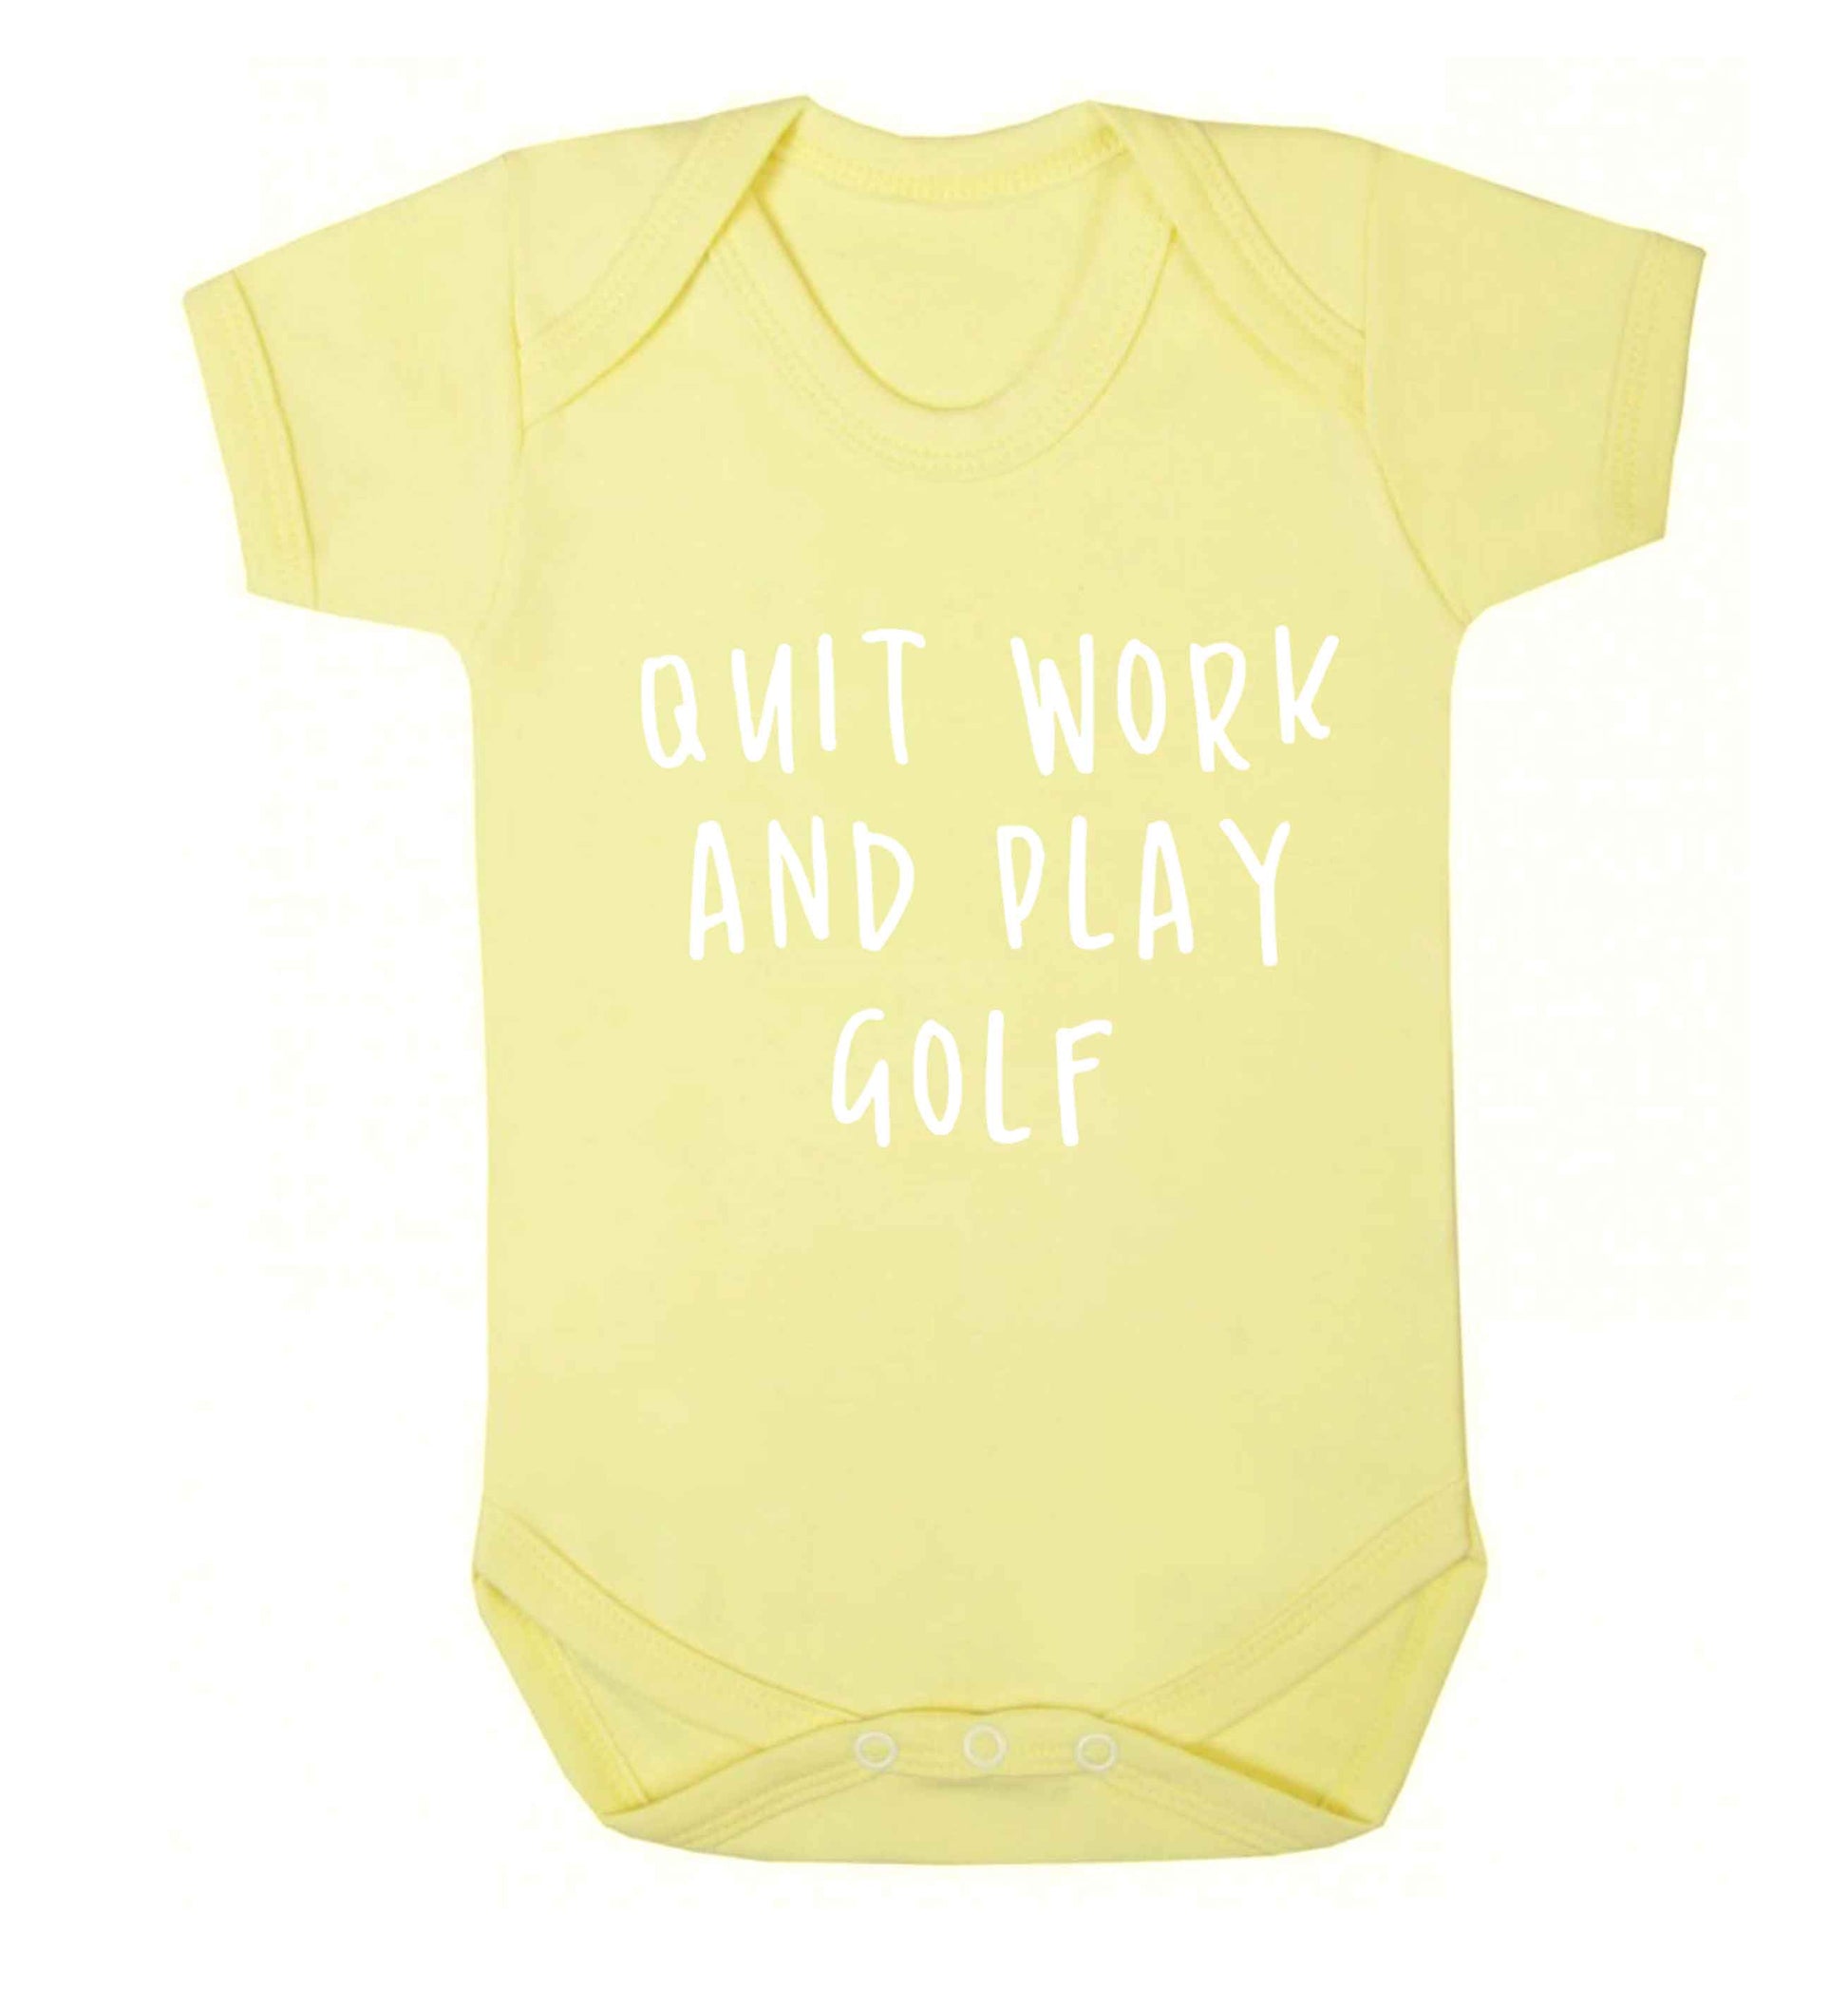 Quit work and play golf Baby Vest pale yellow 18-24 months